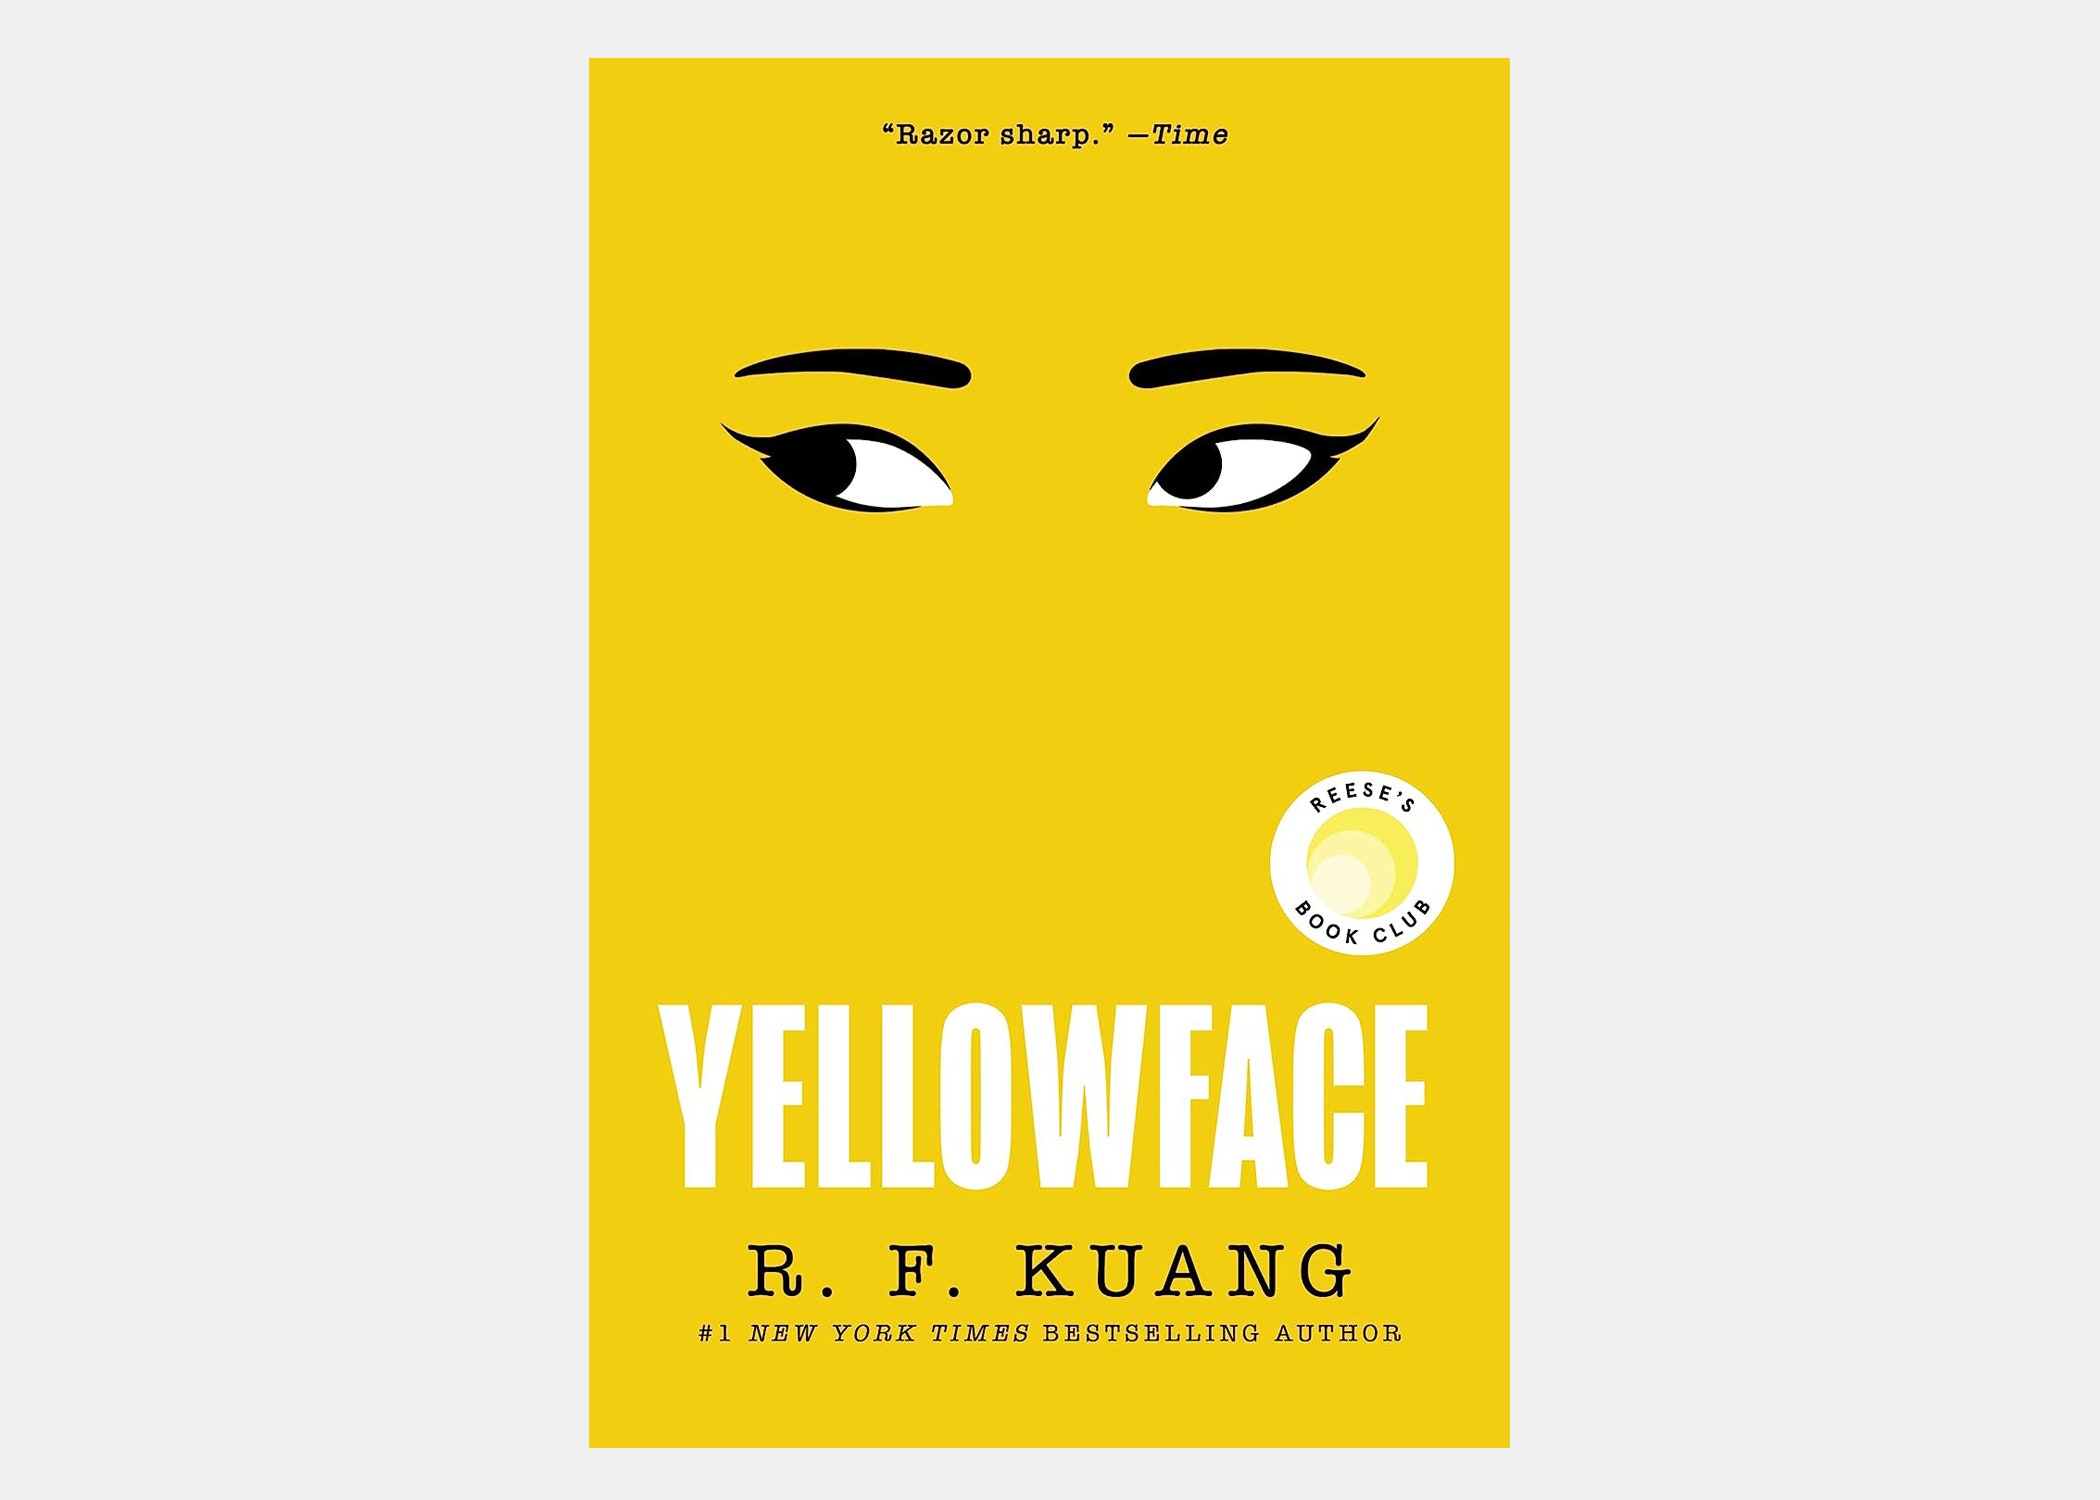 <p>On a spontaneous decision, I decided to delve into R. F. Kuang's <em>Yellowface</em>, and I must say, it did not disappoint. The story revolves around two aspiring writers: Athena Liu, a critically acclaimed writer who has just signed a deal with Netflix; and June Hayward, whose debut novel sank and never made it to a paperback. Tragedy strikes and Athena dies in a freak accident, right in front of June’s eyes. Our dear June then goes on to steal Athena’s novel and passes it off as her own creation, with minor edits, in search of the recognition she craved. And she gets it until damaging evidence surfaces, threatening June’s brand-new success.</p> <p>Kuang cleverly satirizes publishing's double standards, tackling diversity, racism, and cultural appropriation. The story highlights the struggles faced by writers in their quest to produce exceptional works. It also explores the impact of social media on the literary landscape, where authors are often subjected to criticism and called out, sometimes escalating to extreme levels. I found myself eagerly flipping through, page after page, captivated by the unfolding events. —<em>Anukriti Malik, social media senior associate</em></p> $17, Amazon. <a href="https://www.amazon.com/Yellowface-Novel-R-F-Kuang/dp/0063250837">Get it now!</a><p>Sign up to receive the latest news, expert tips, and inspiration on all things travel</p><a href="https://www.cntraveler.com/newsletter/the-daily?sourceCode=msnsend">Inspire Me</a>